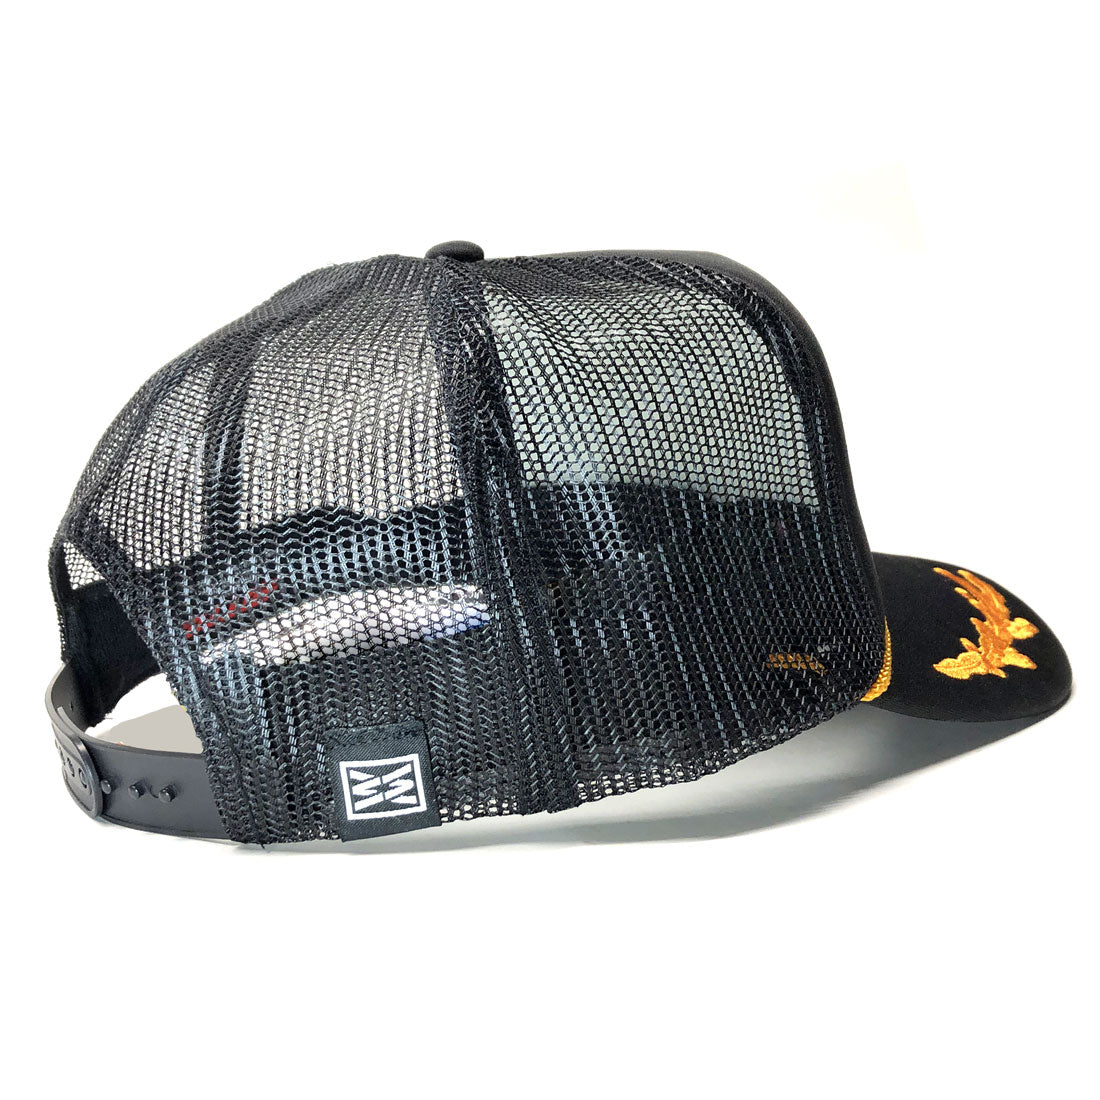 PARALLEL CURVED BILL CAPTAINS TRUCKER HAT IN BLACK